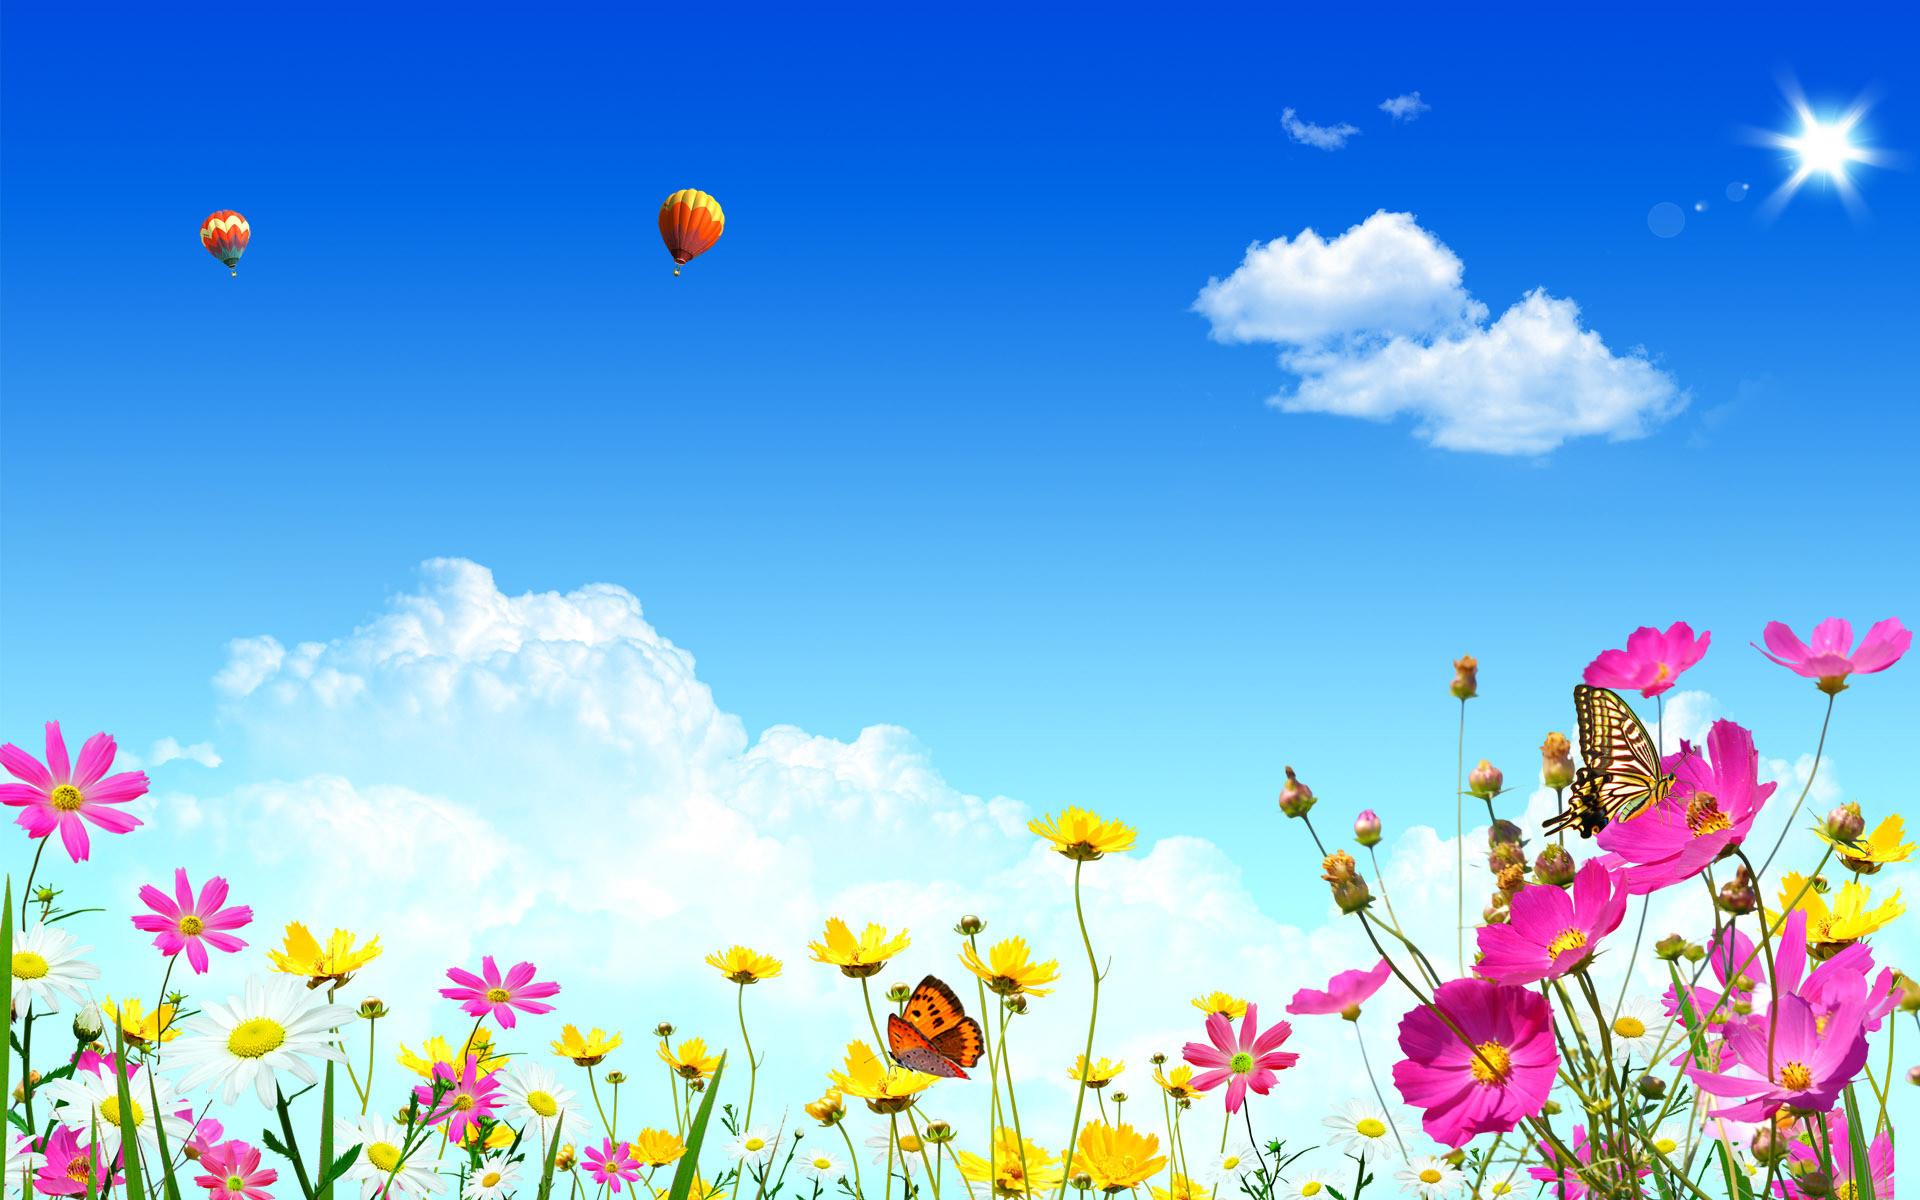 Beautiful Flowers And Air Balloons Over Backgr Wallpaper